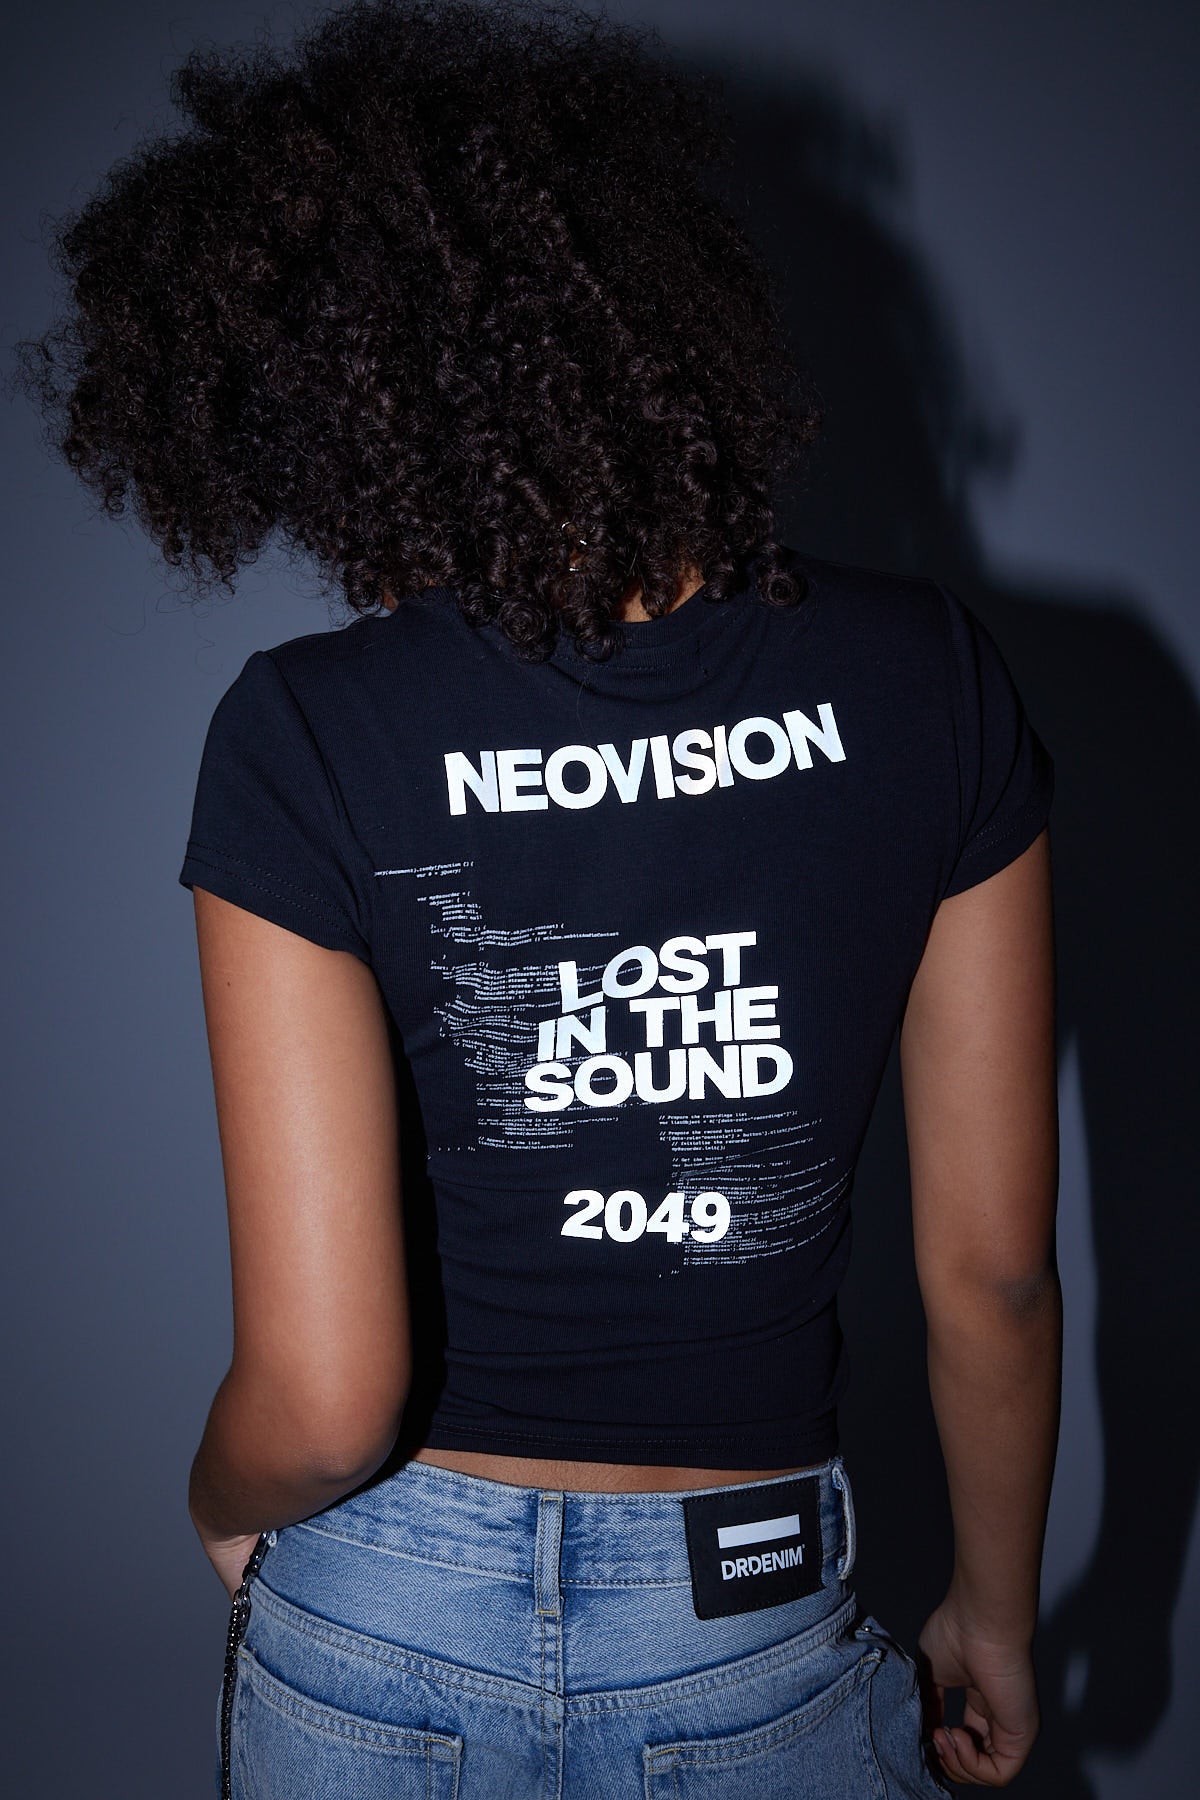 Neovision Lost In The sound Baby Tee Black